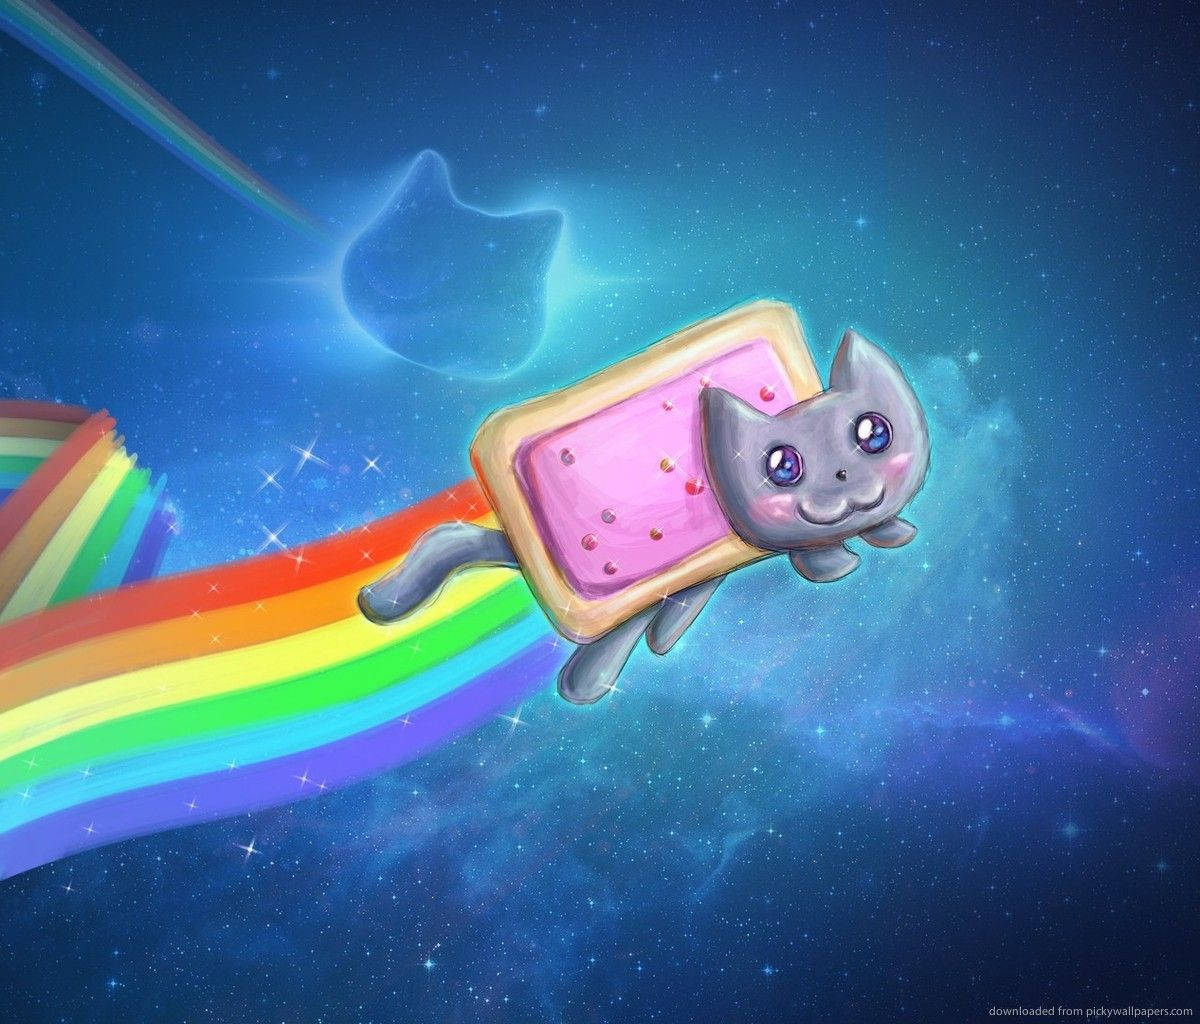 Look Cool And Cuddly With A Nyan Cat Fan Art Wallpaper! Background